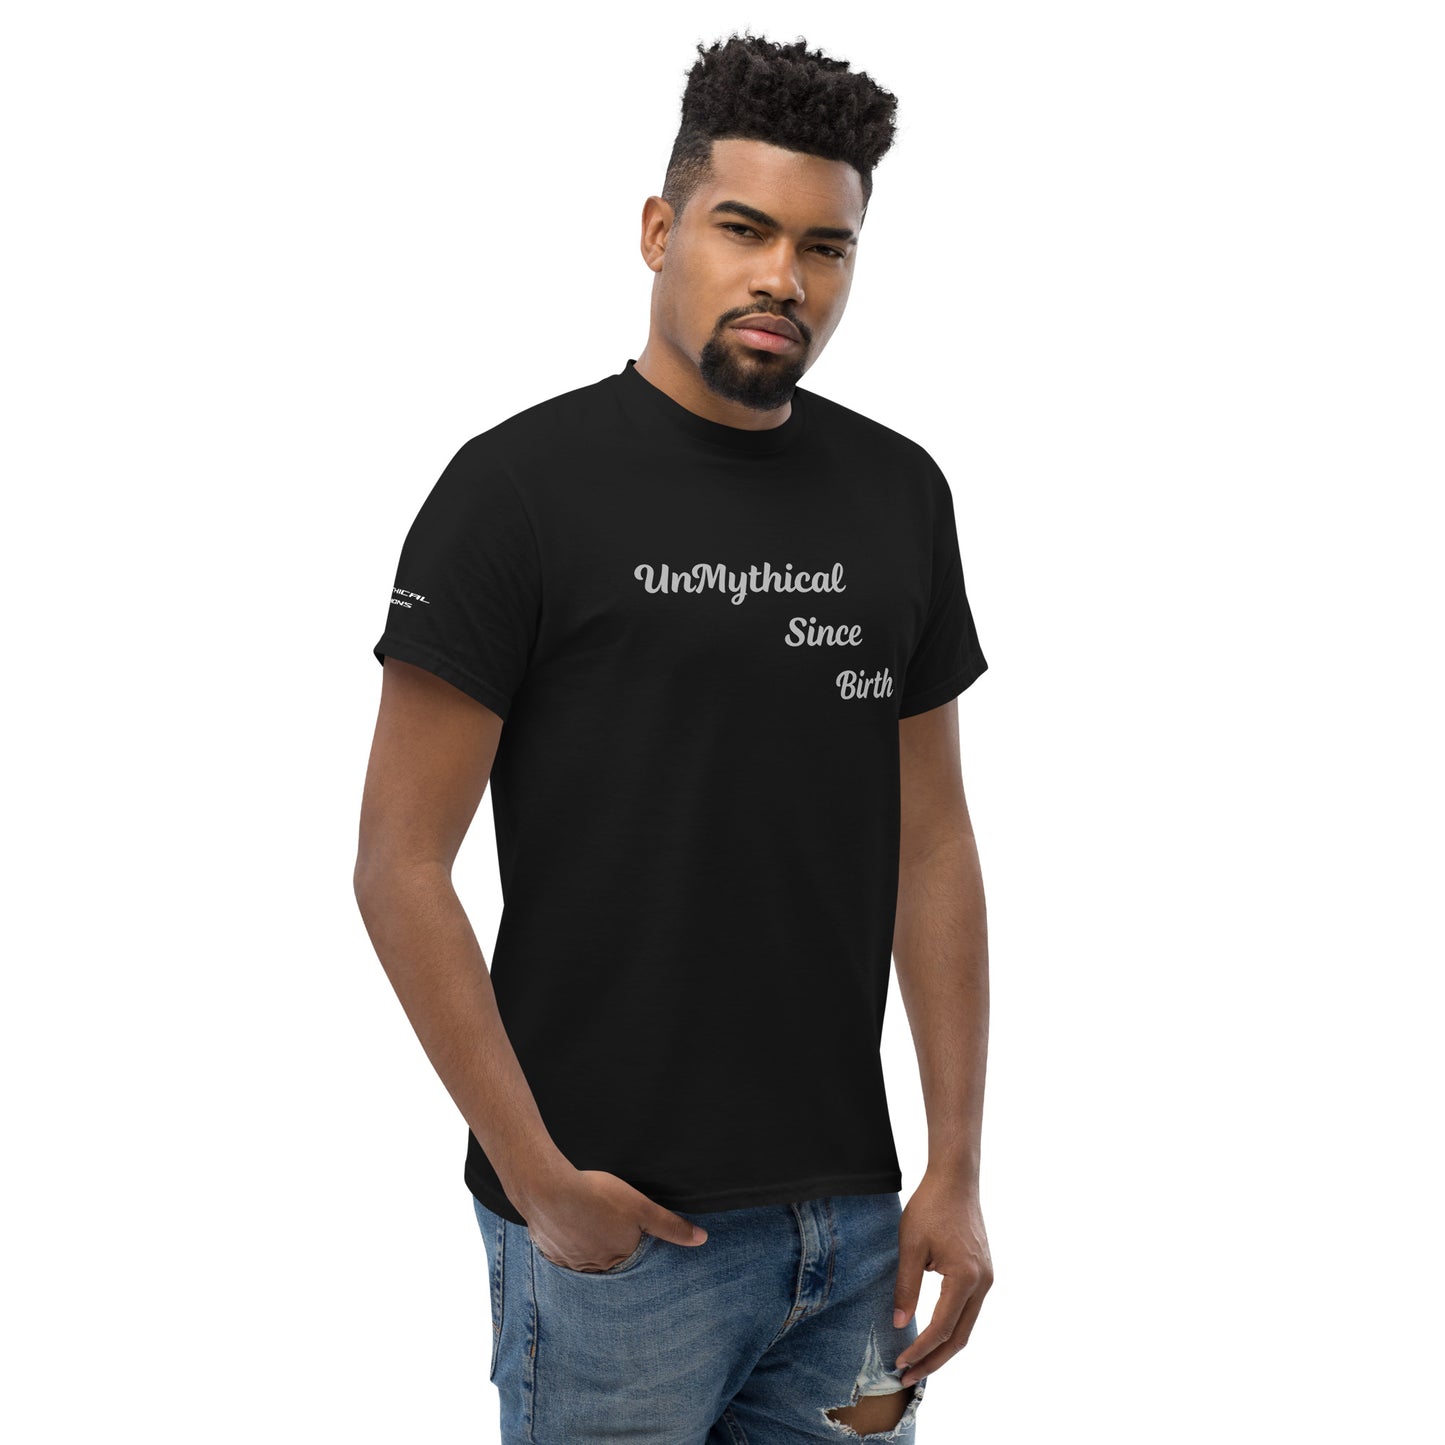 Men's classic tee UnMythical Birth